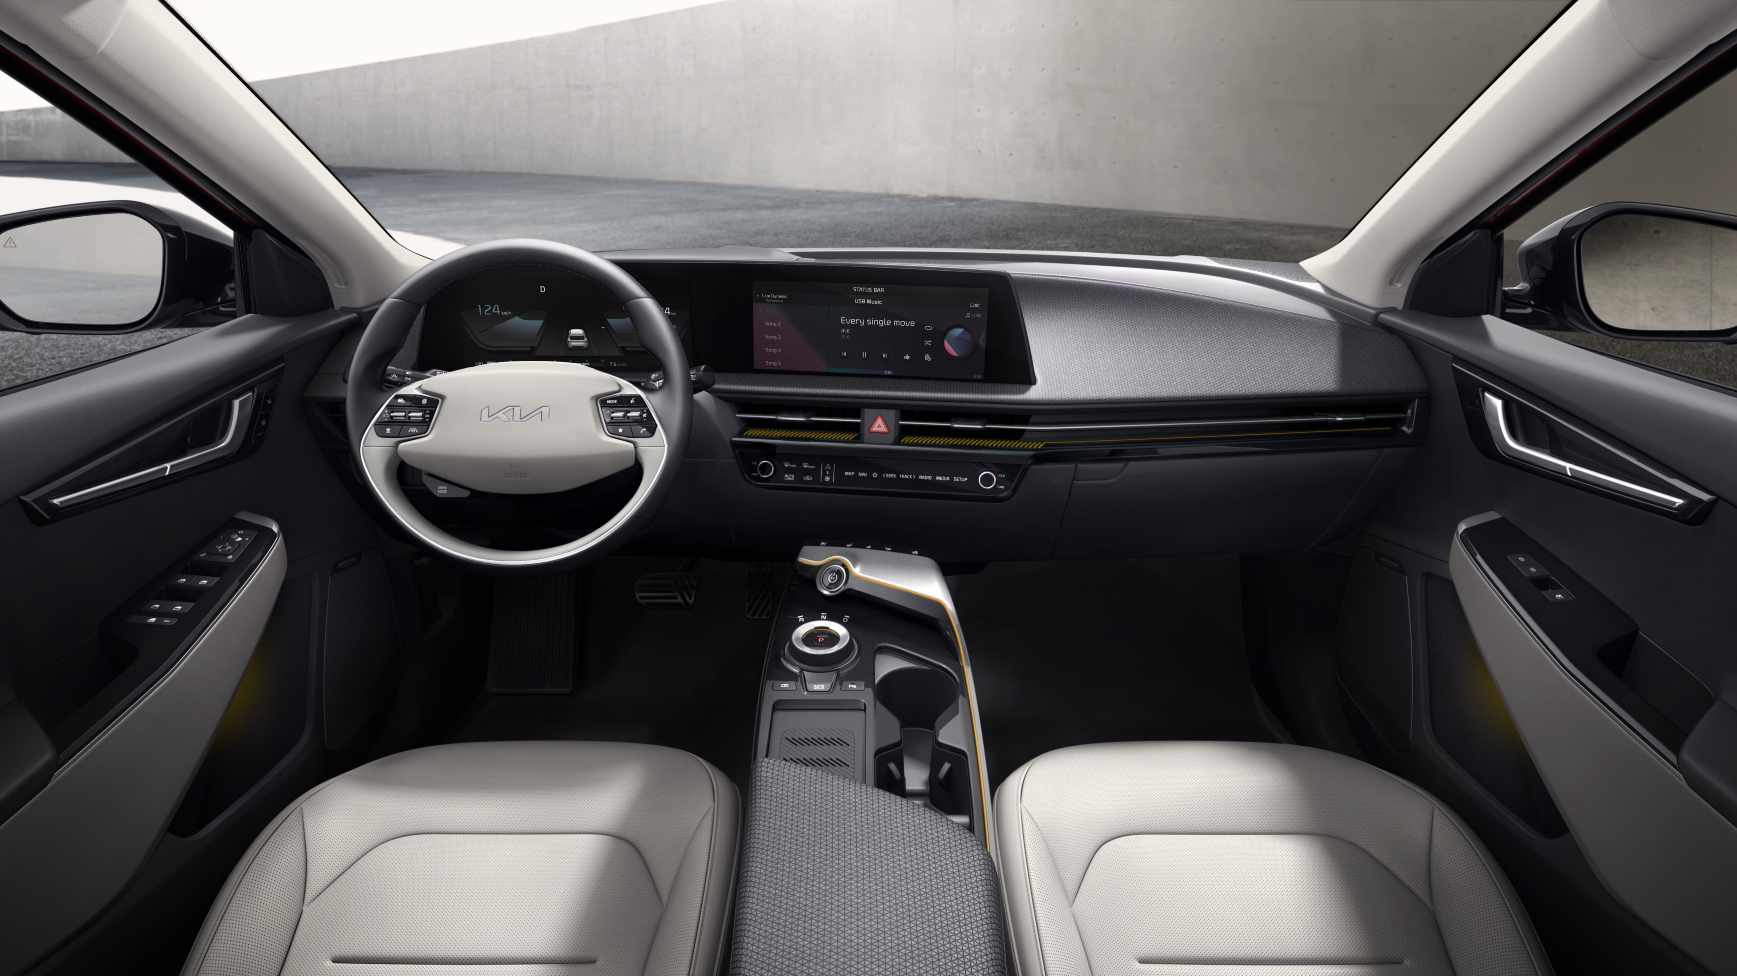 The Kia EV6 features a curved, high-definition touchscreen on the inside. Image: Kia